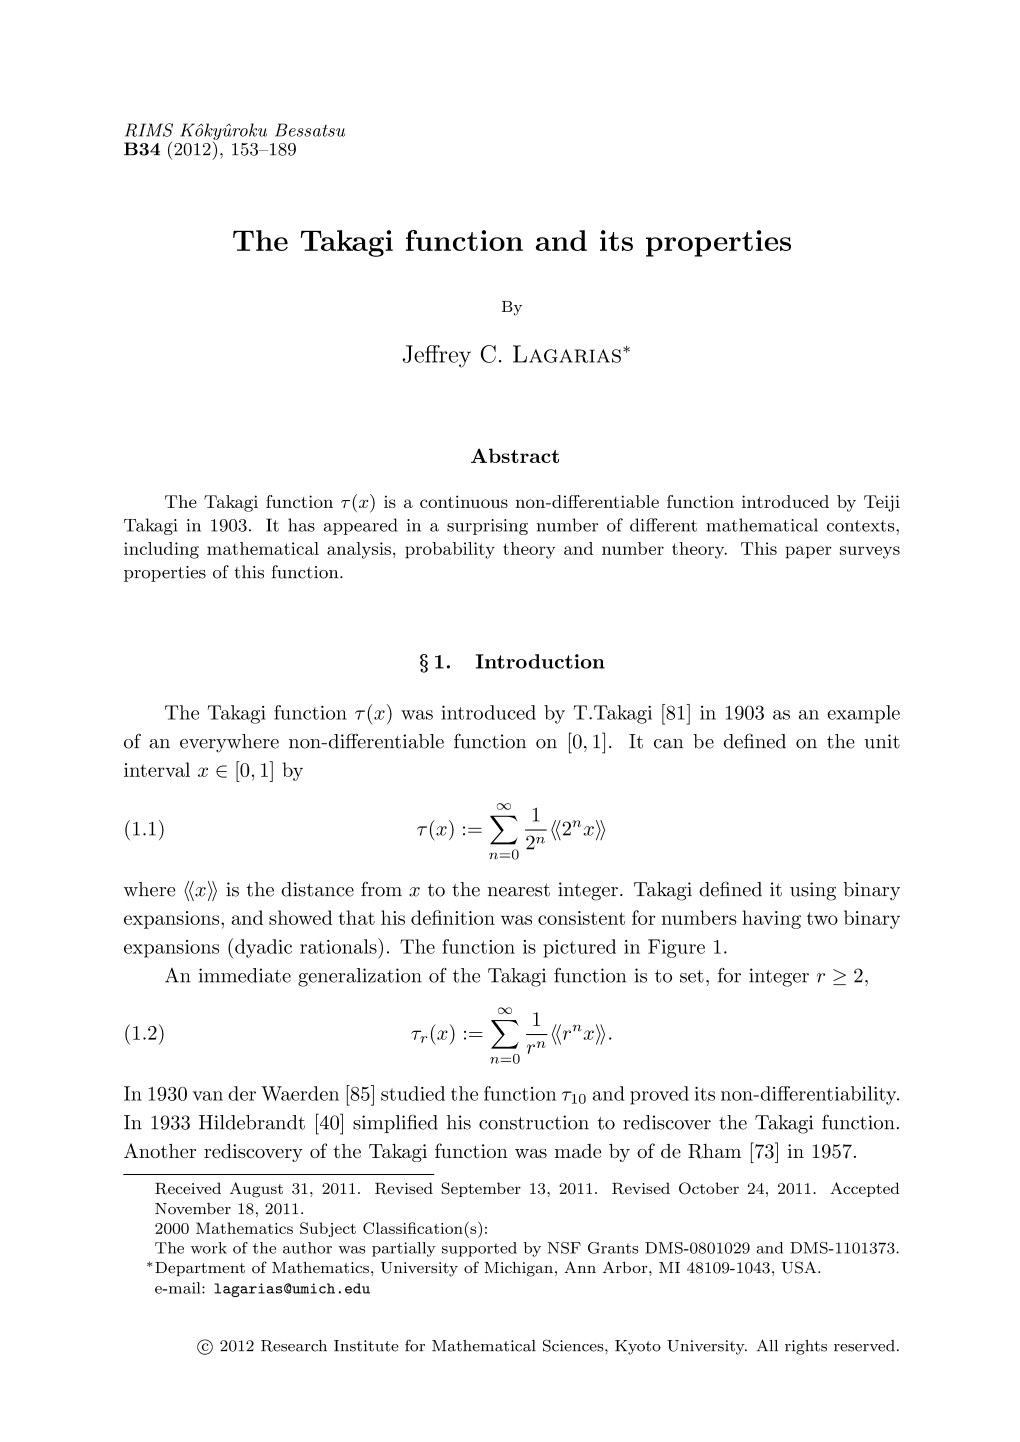 The Takagi Function and Its Properties